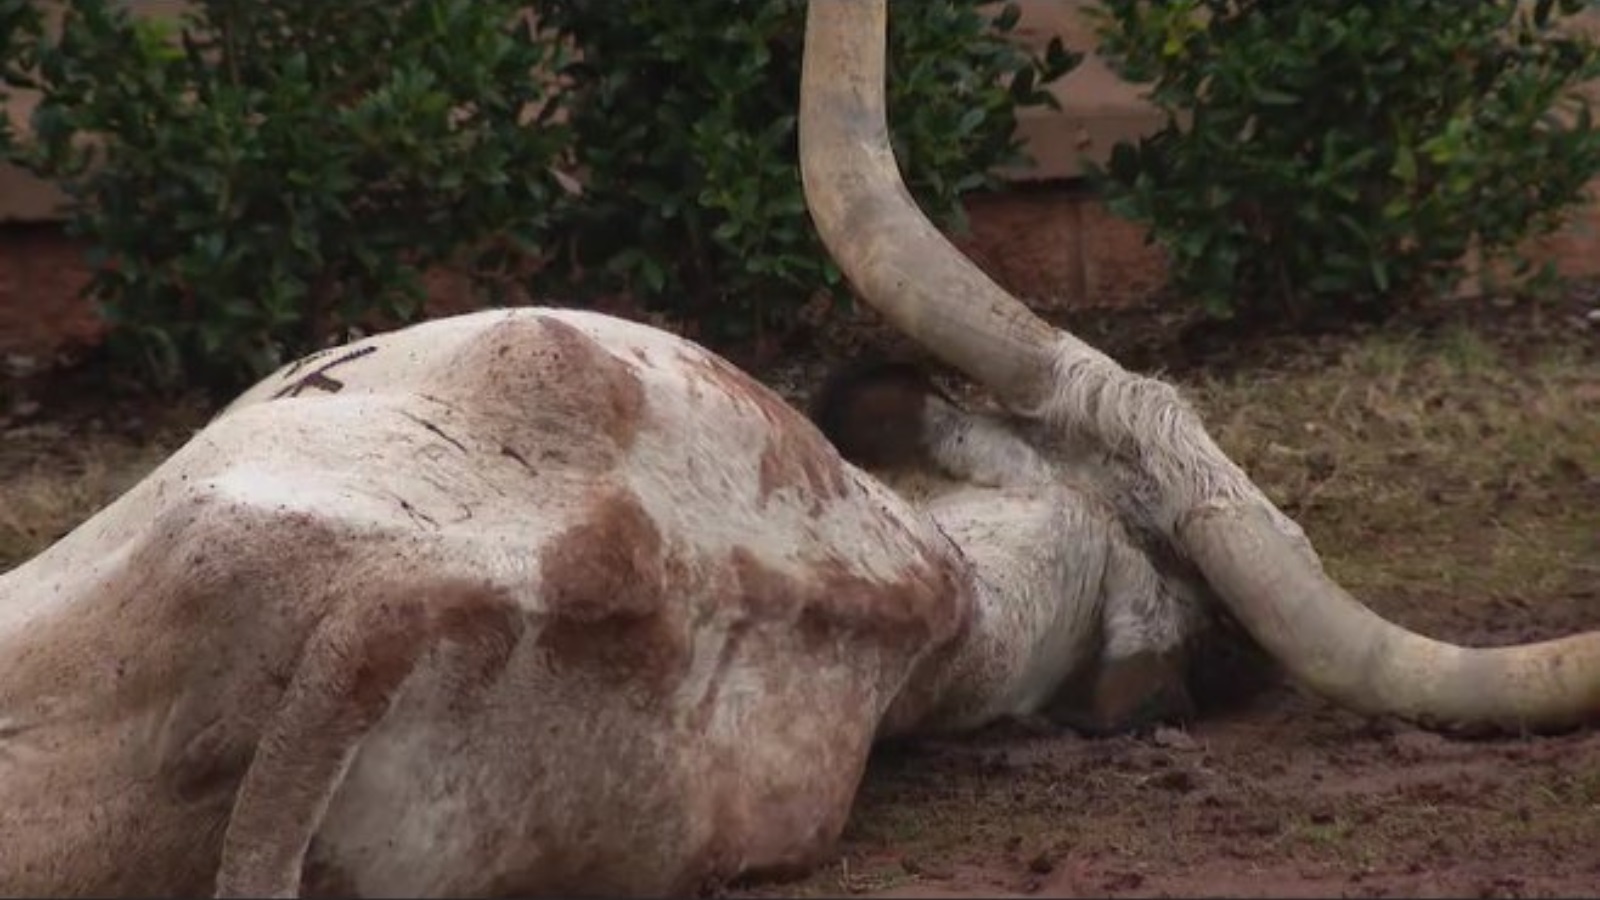 Four Charged For Dumping Dead Longhorn Near OSU Campus